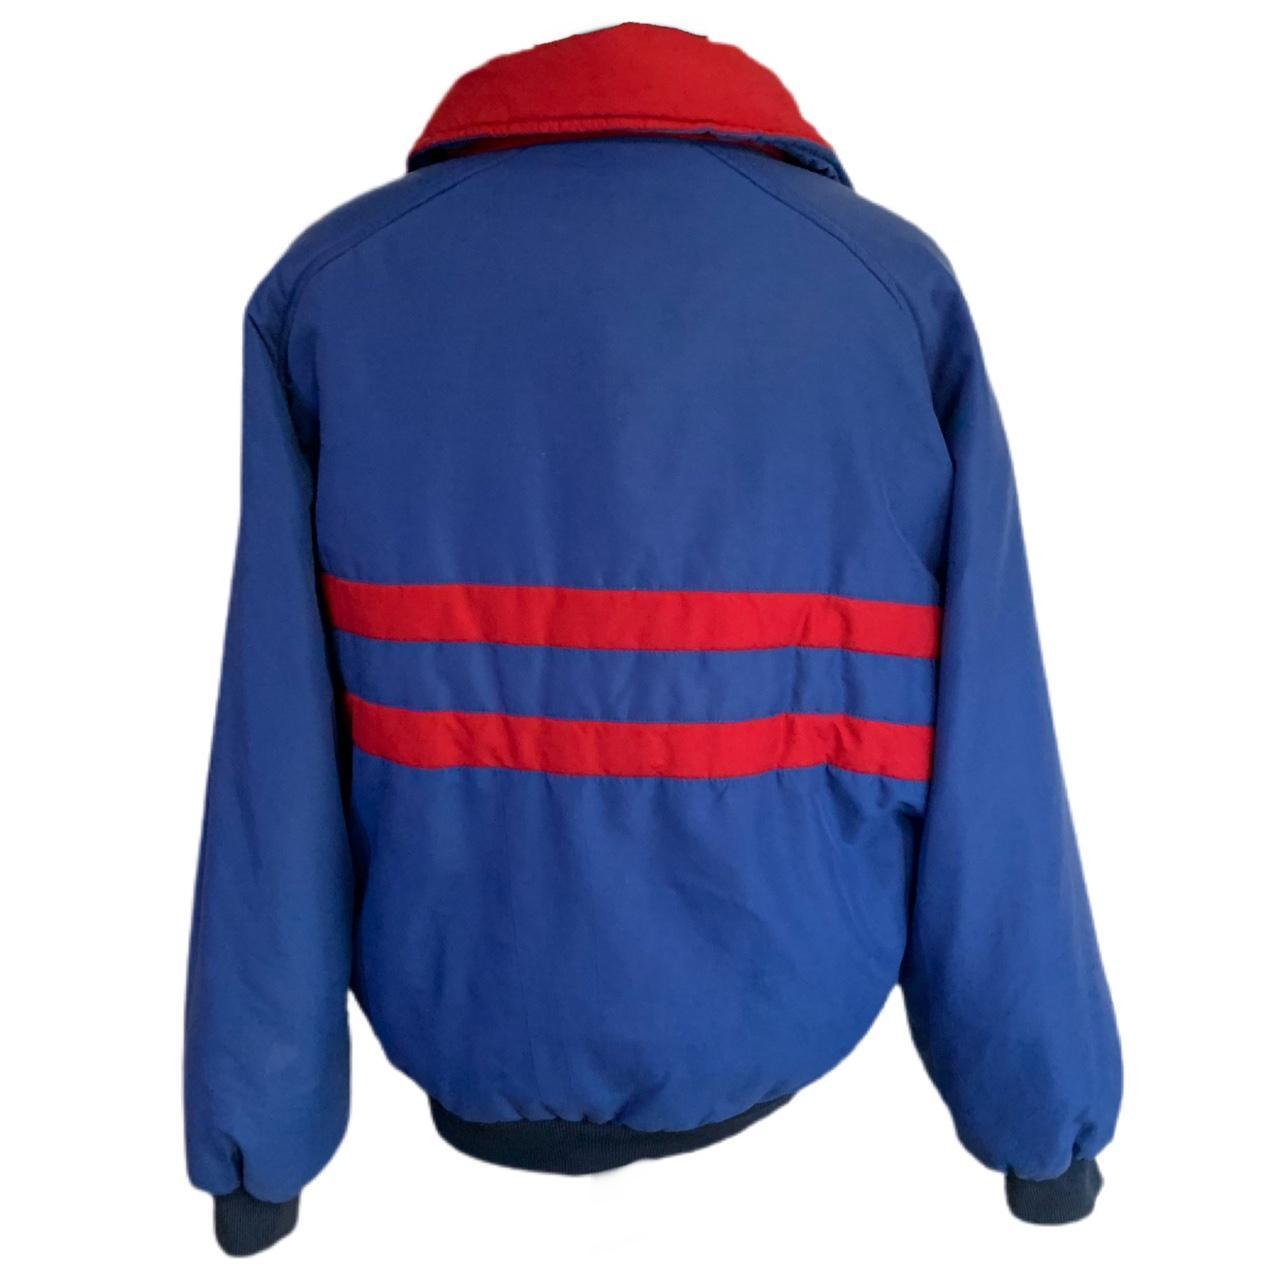 Men's Blue and Red Jacket (3)